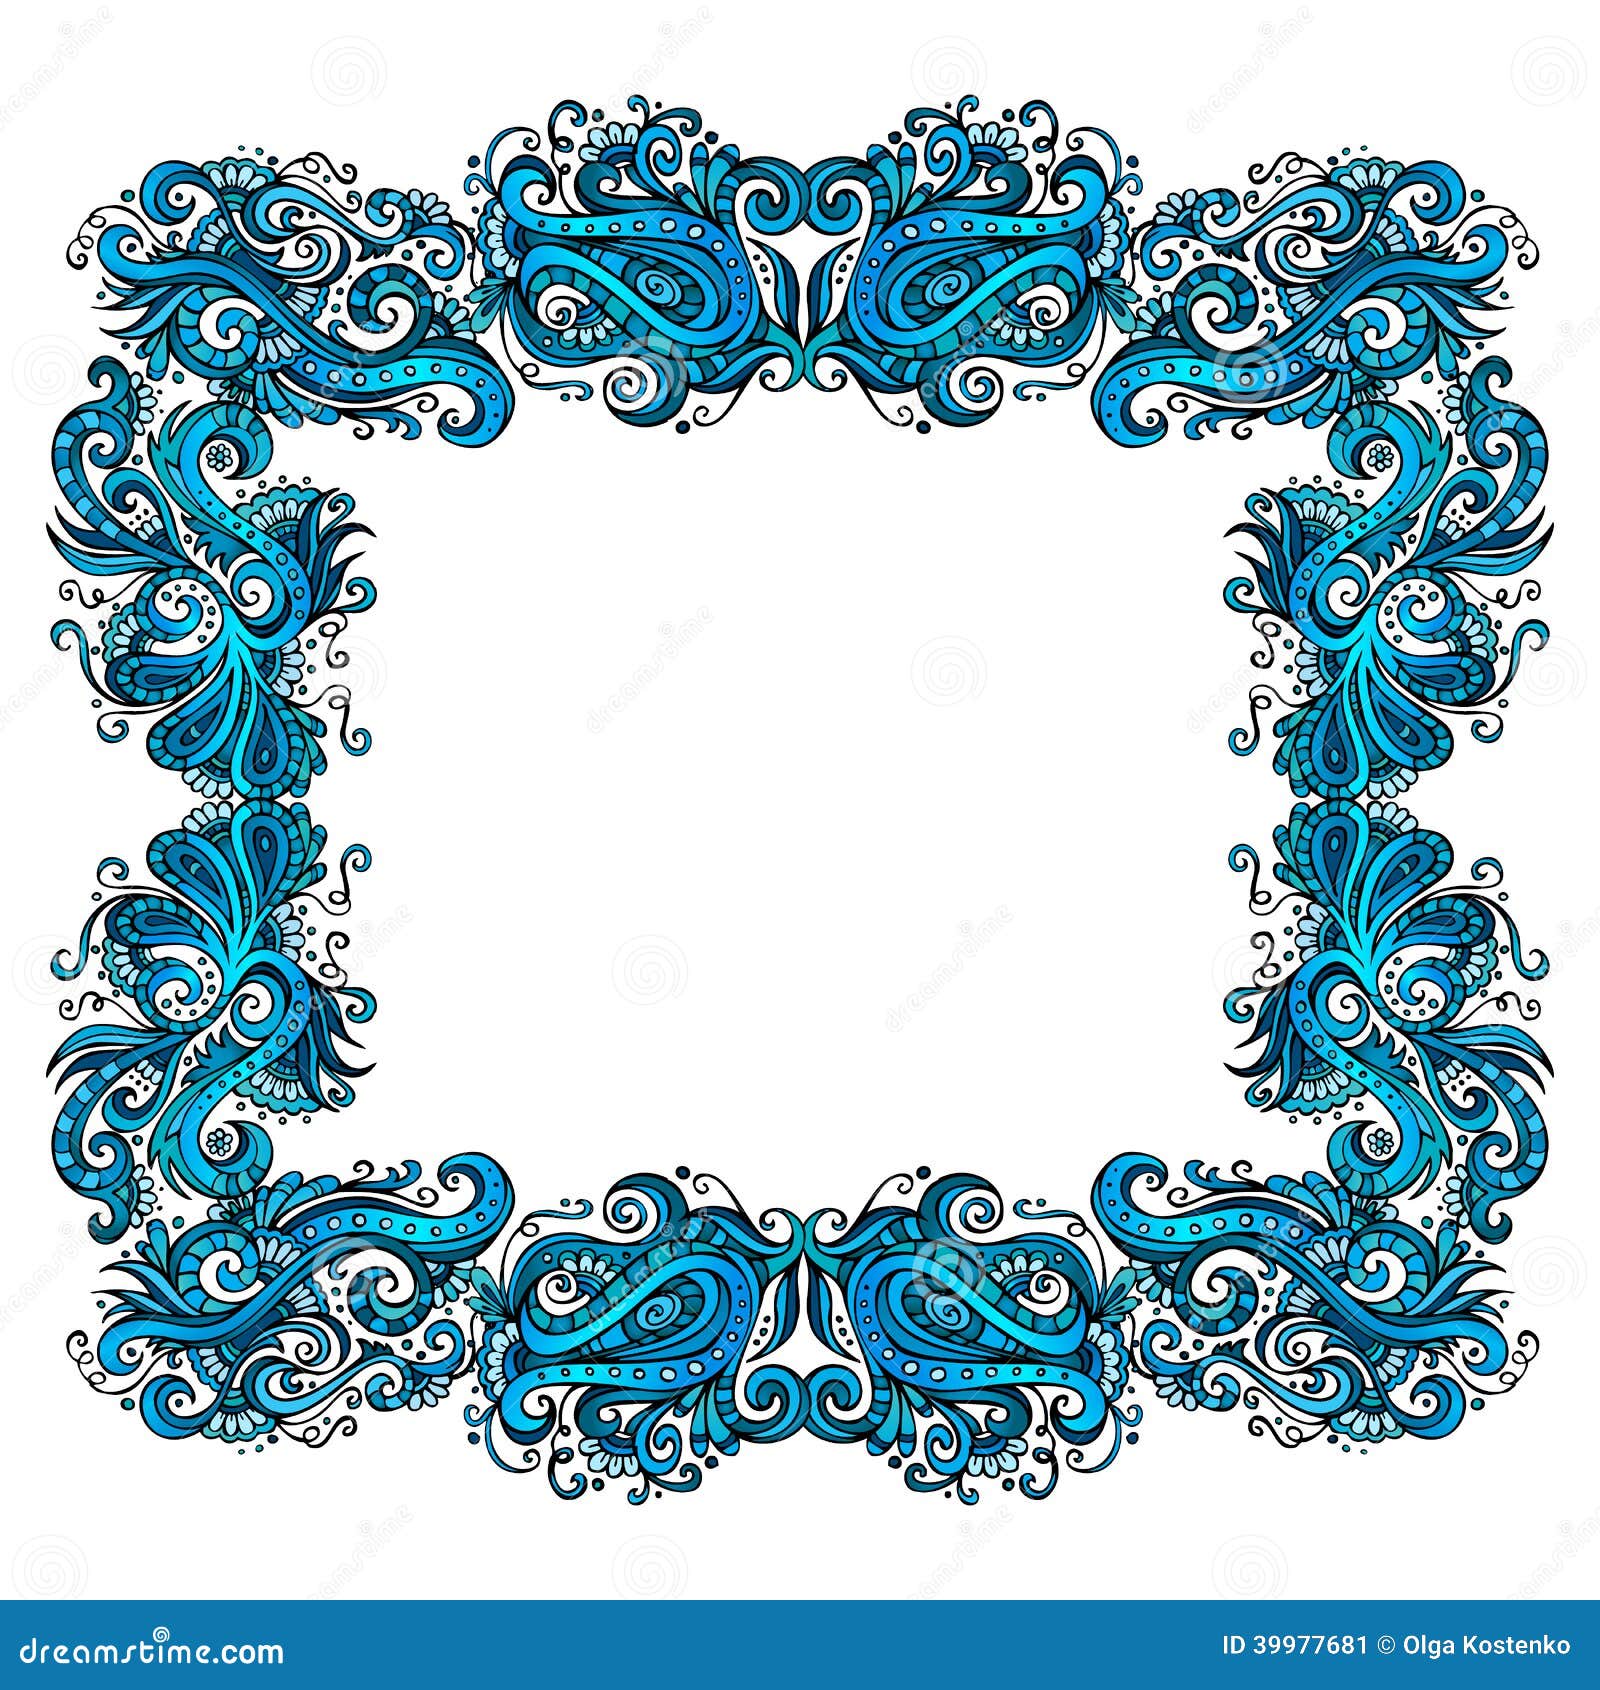 Download Abstract Vector Simple Floral Border Stock Vector ...